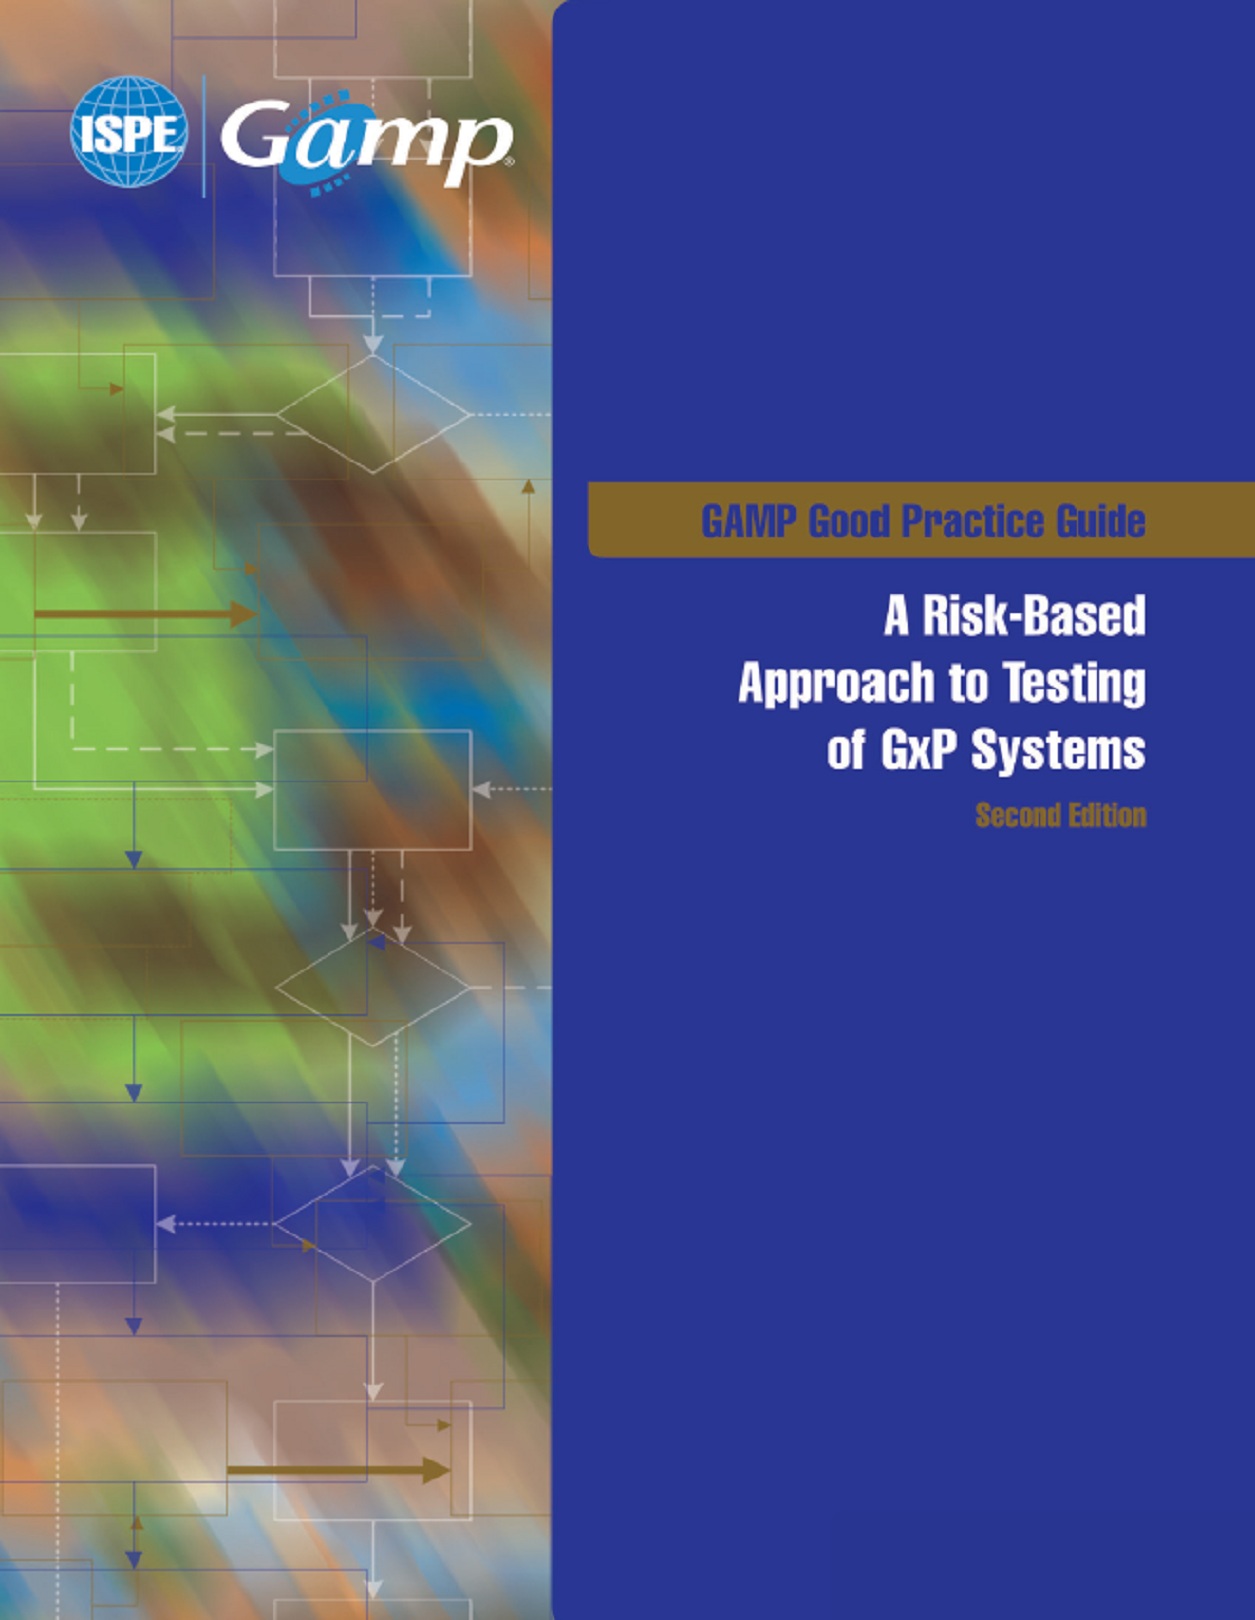 GAMP Good Practice Guide: A Risk-Based Approach to Testing of GxP Systems (Second Edition)